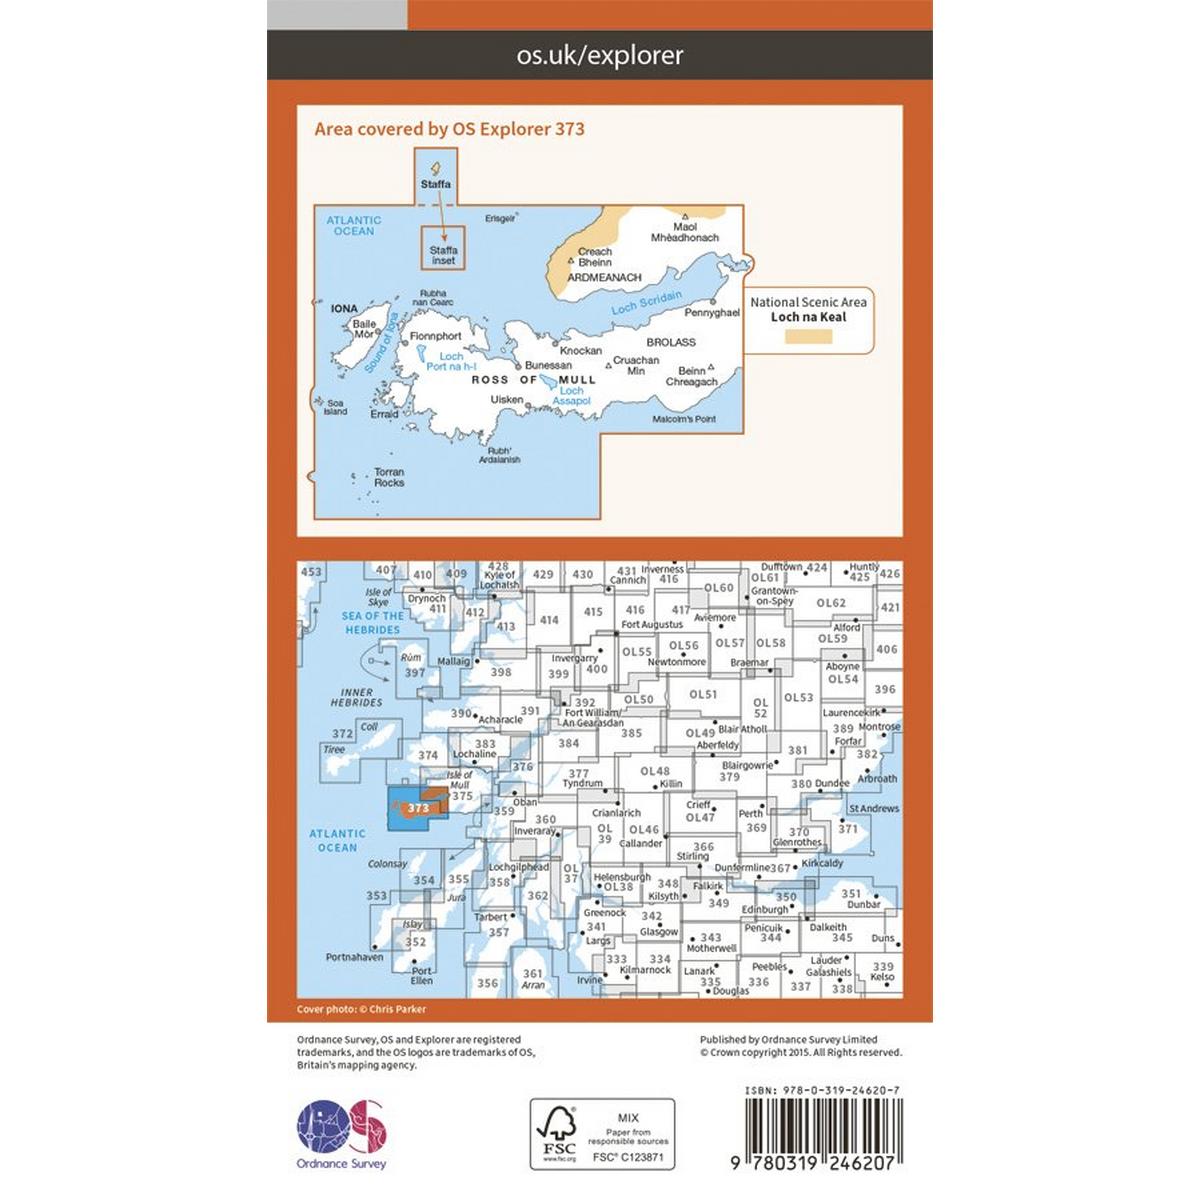 Ordnance Survey OS Explorer Map 373 Iona, Staffa and Ross of Mull